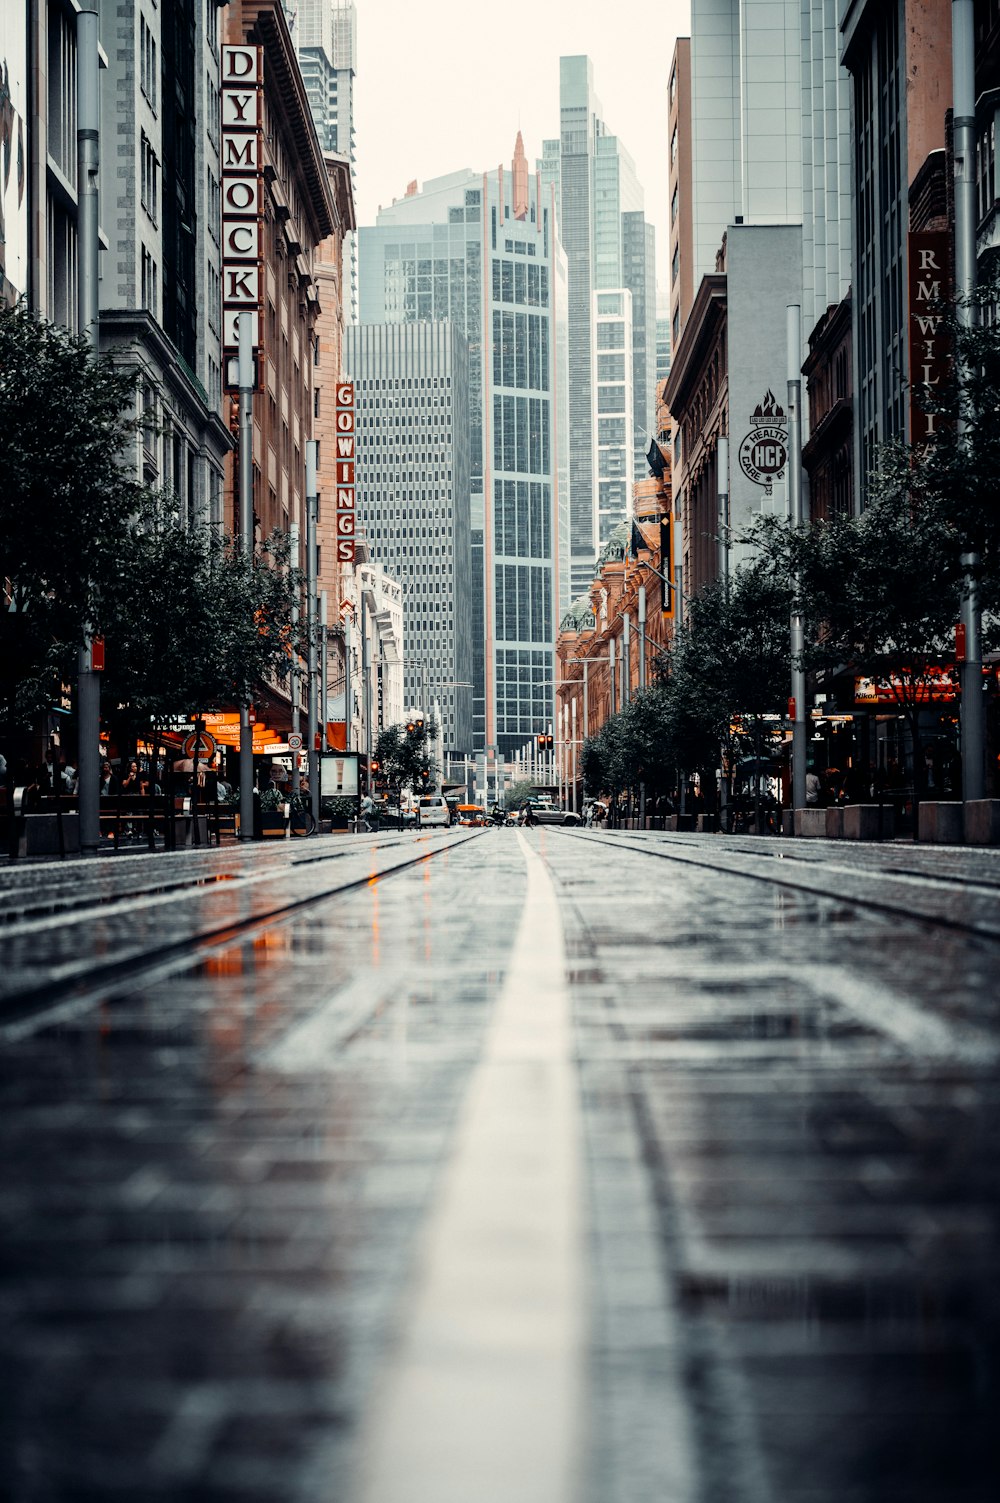 500 City Road Pictures Hd Download Free Images On Unsplash